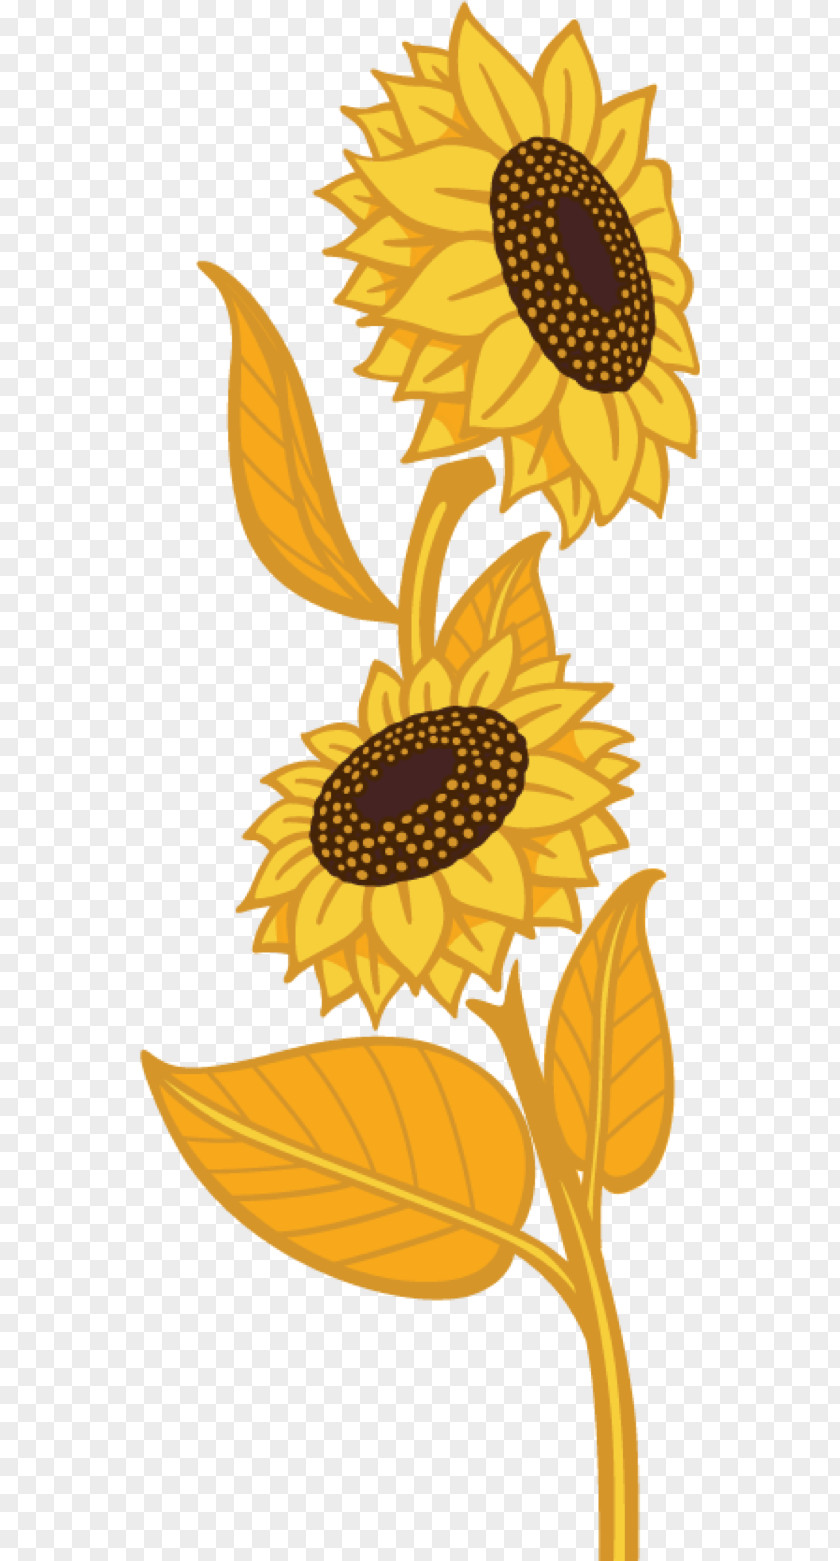 Sunflower Oil Common Seed Daisy Family Flax Plant PNG